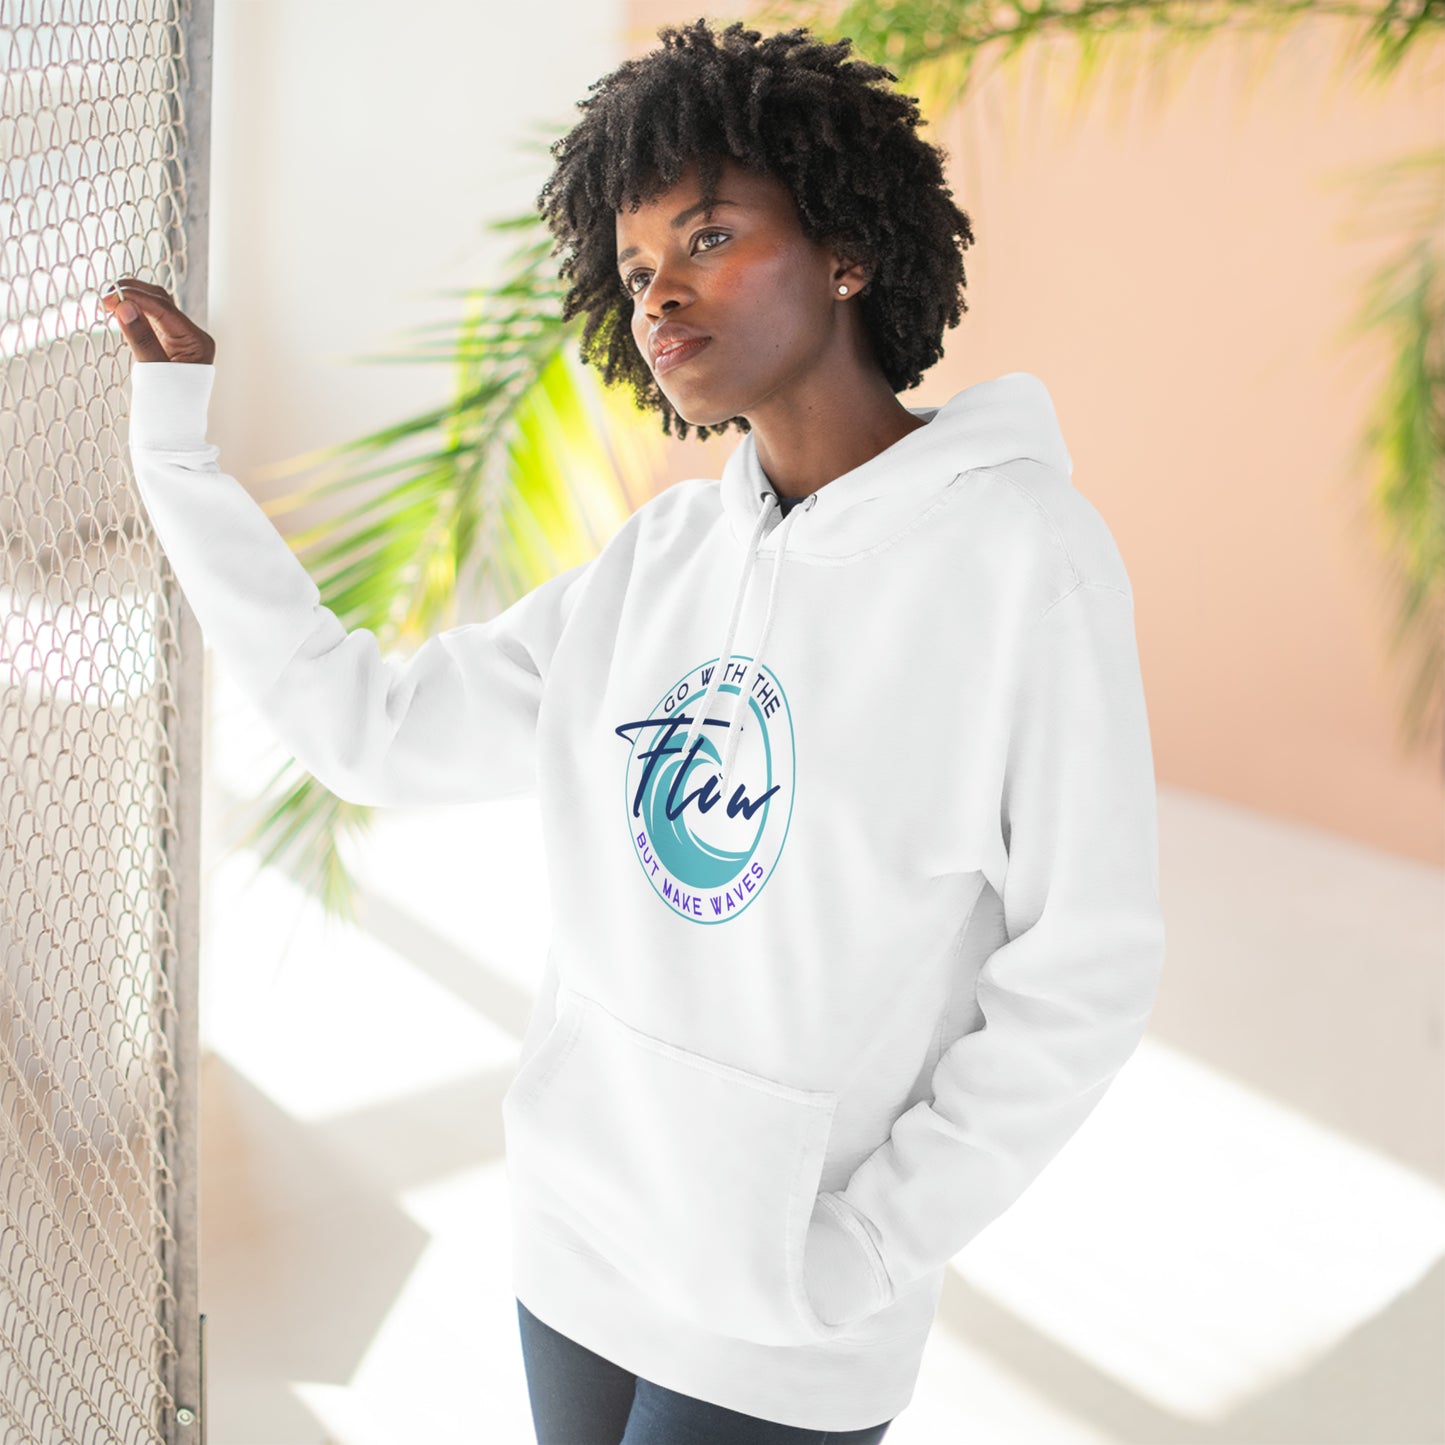 Celebrate Sobriety Gifts has launched a line of unisex hoodies.